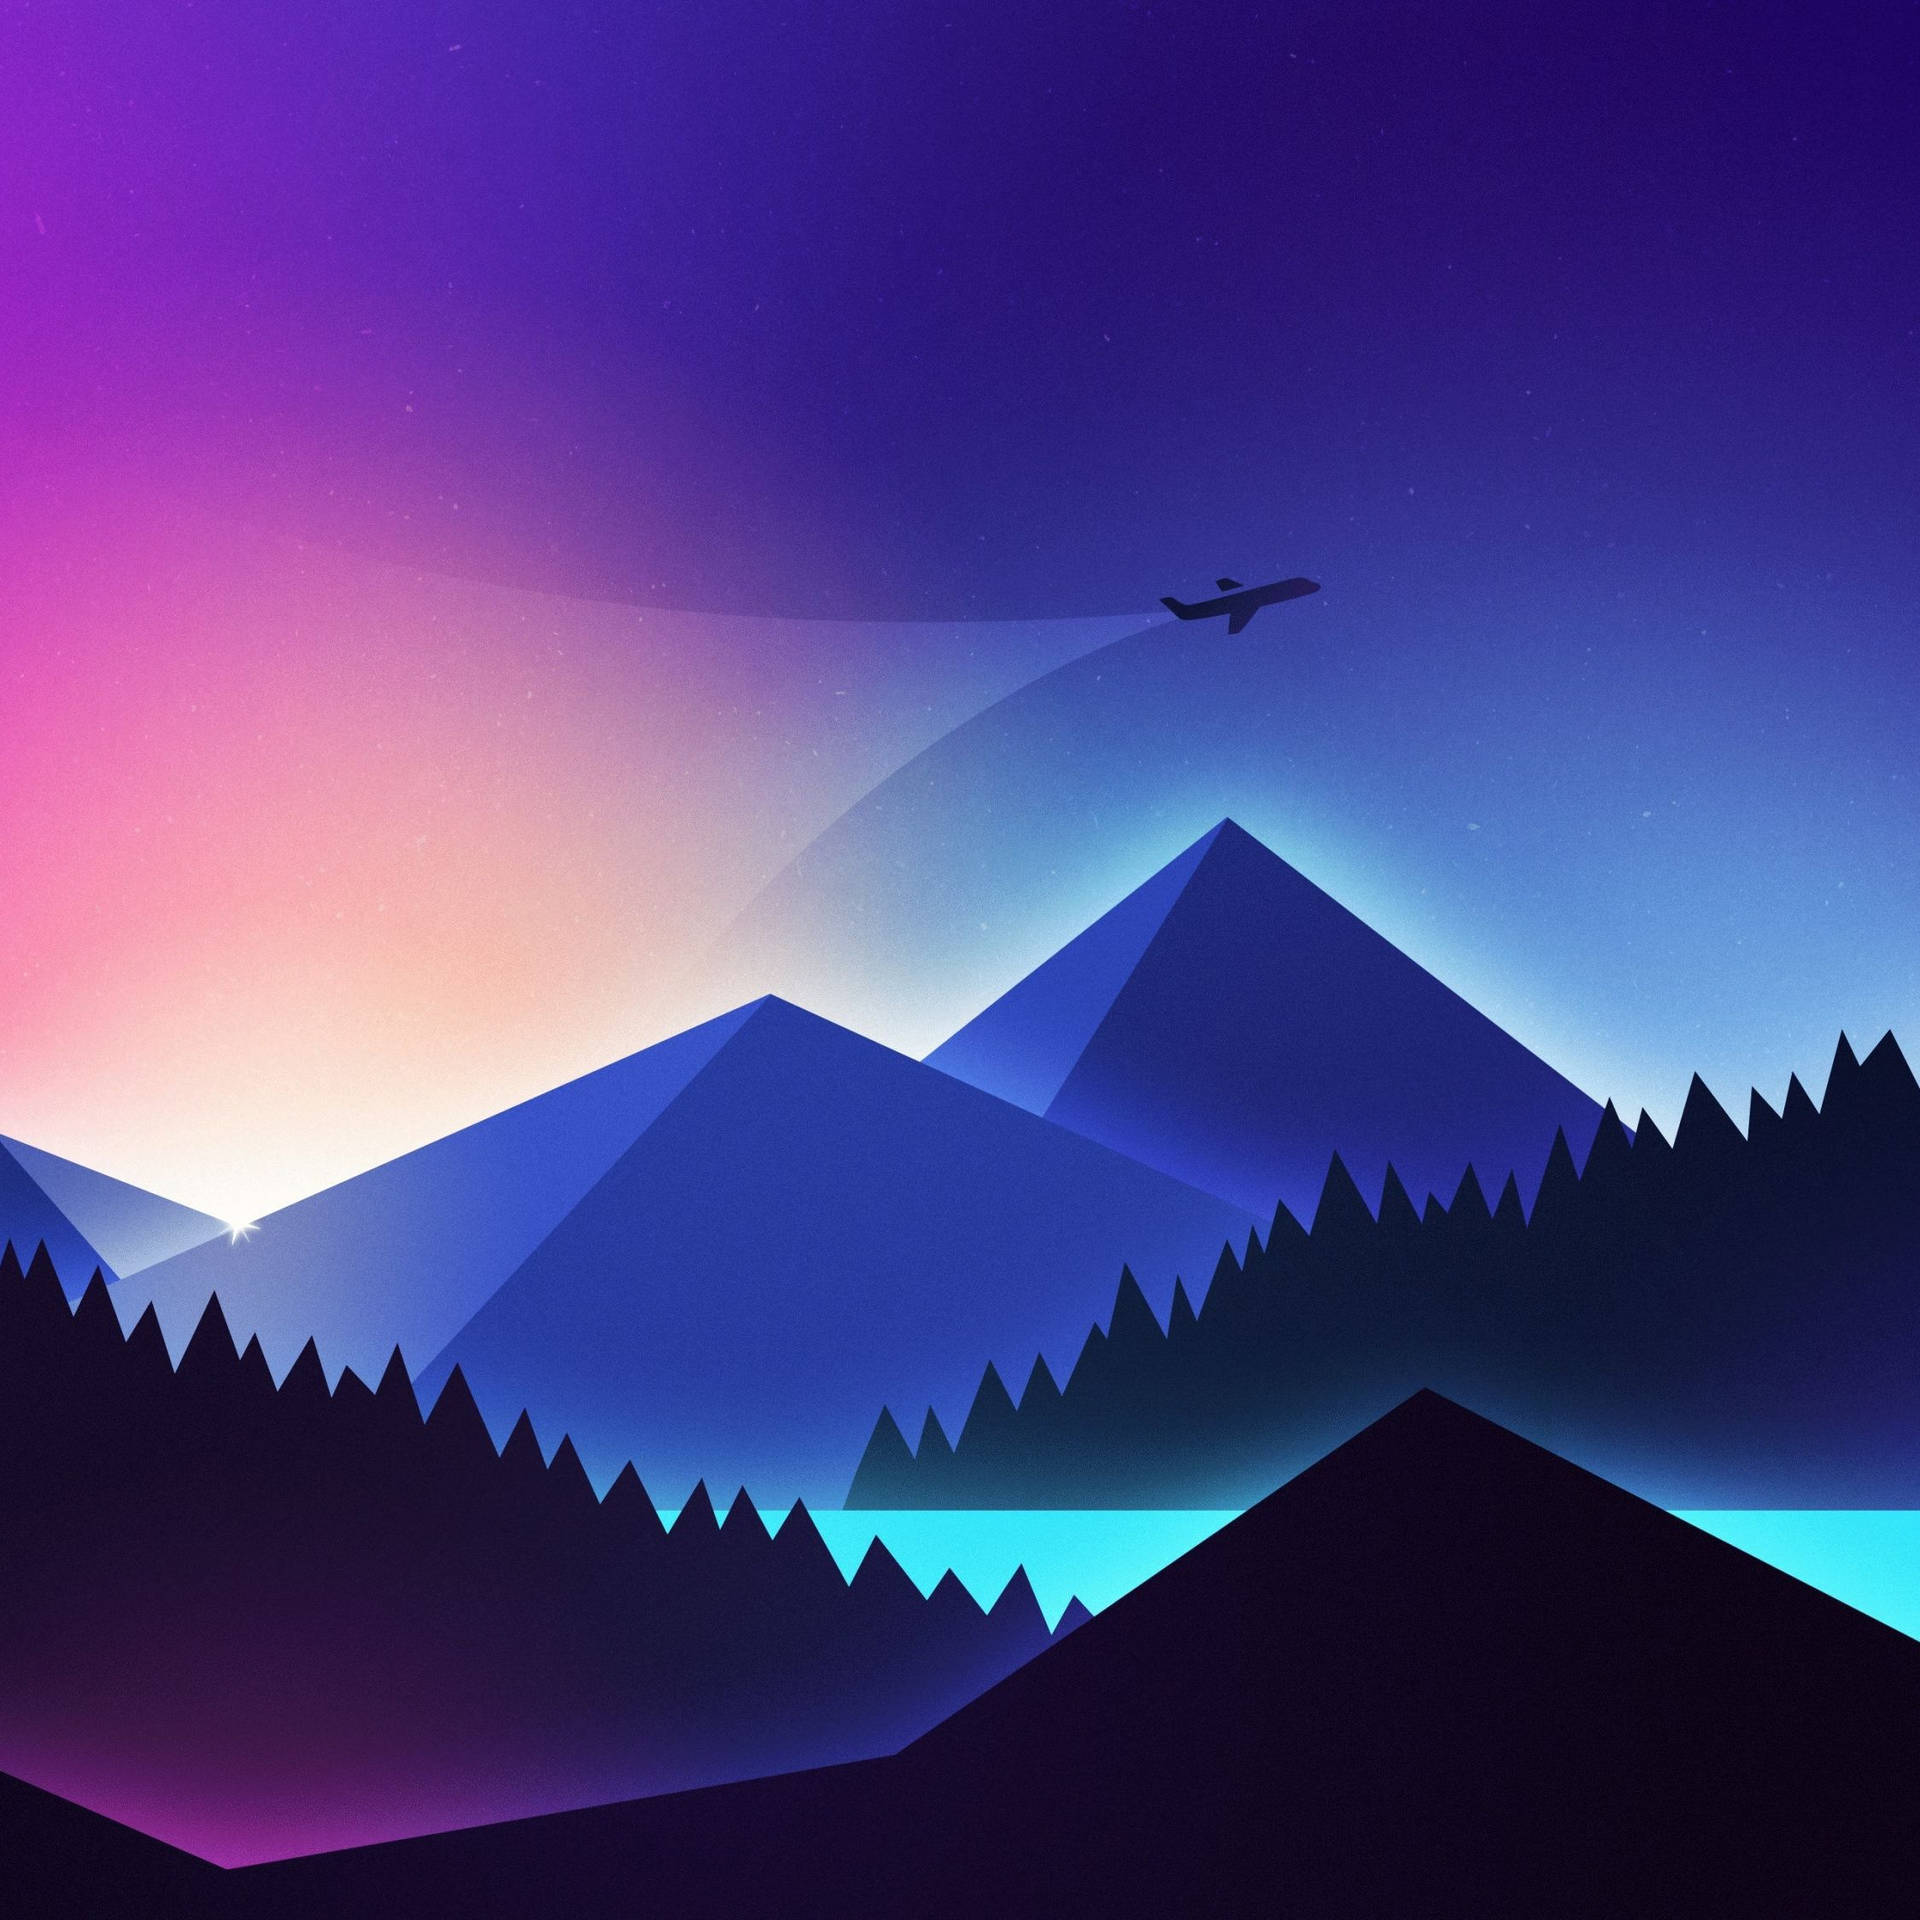 4k Ipad Plane And Mountains Wallpaper